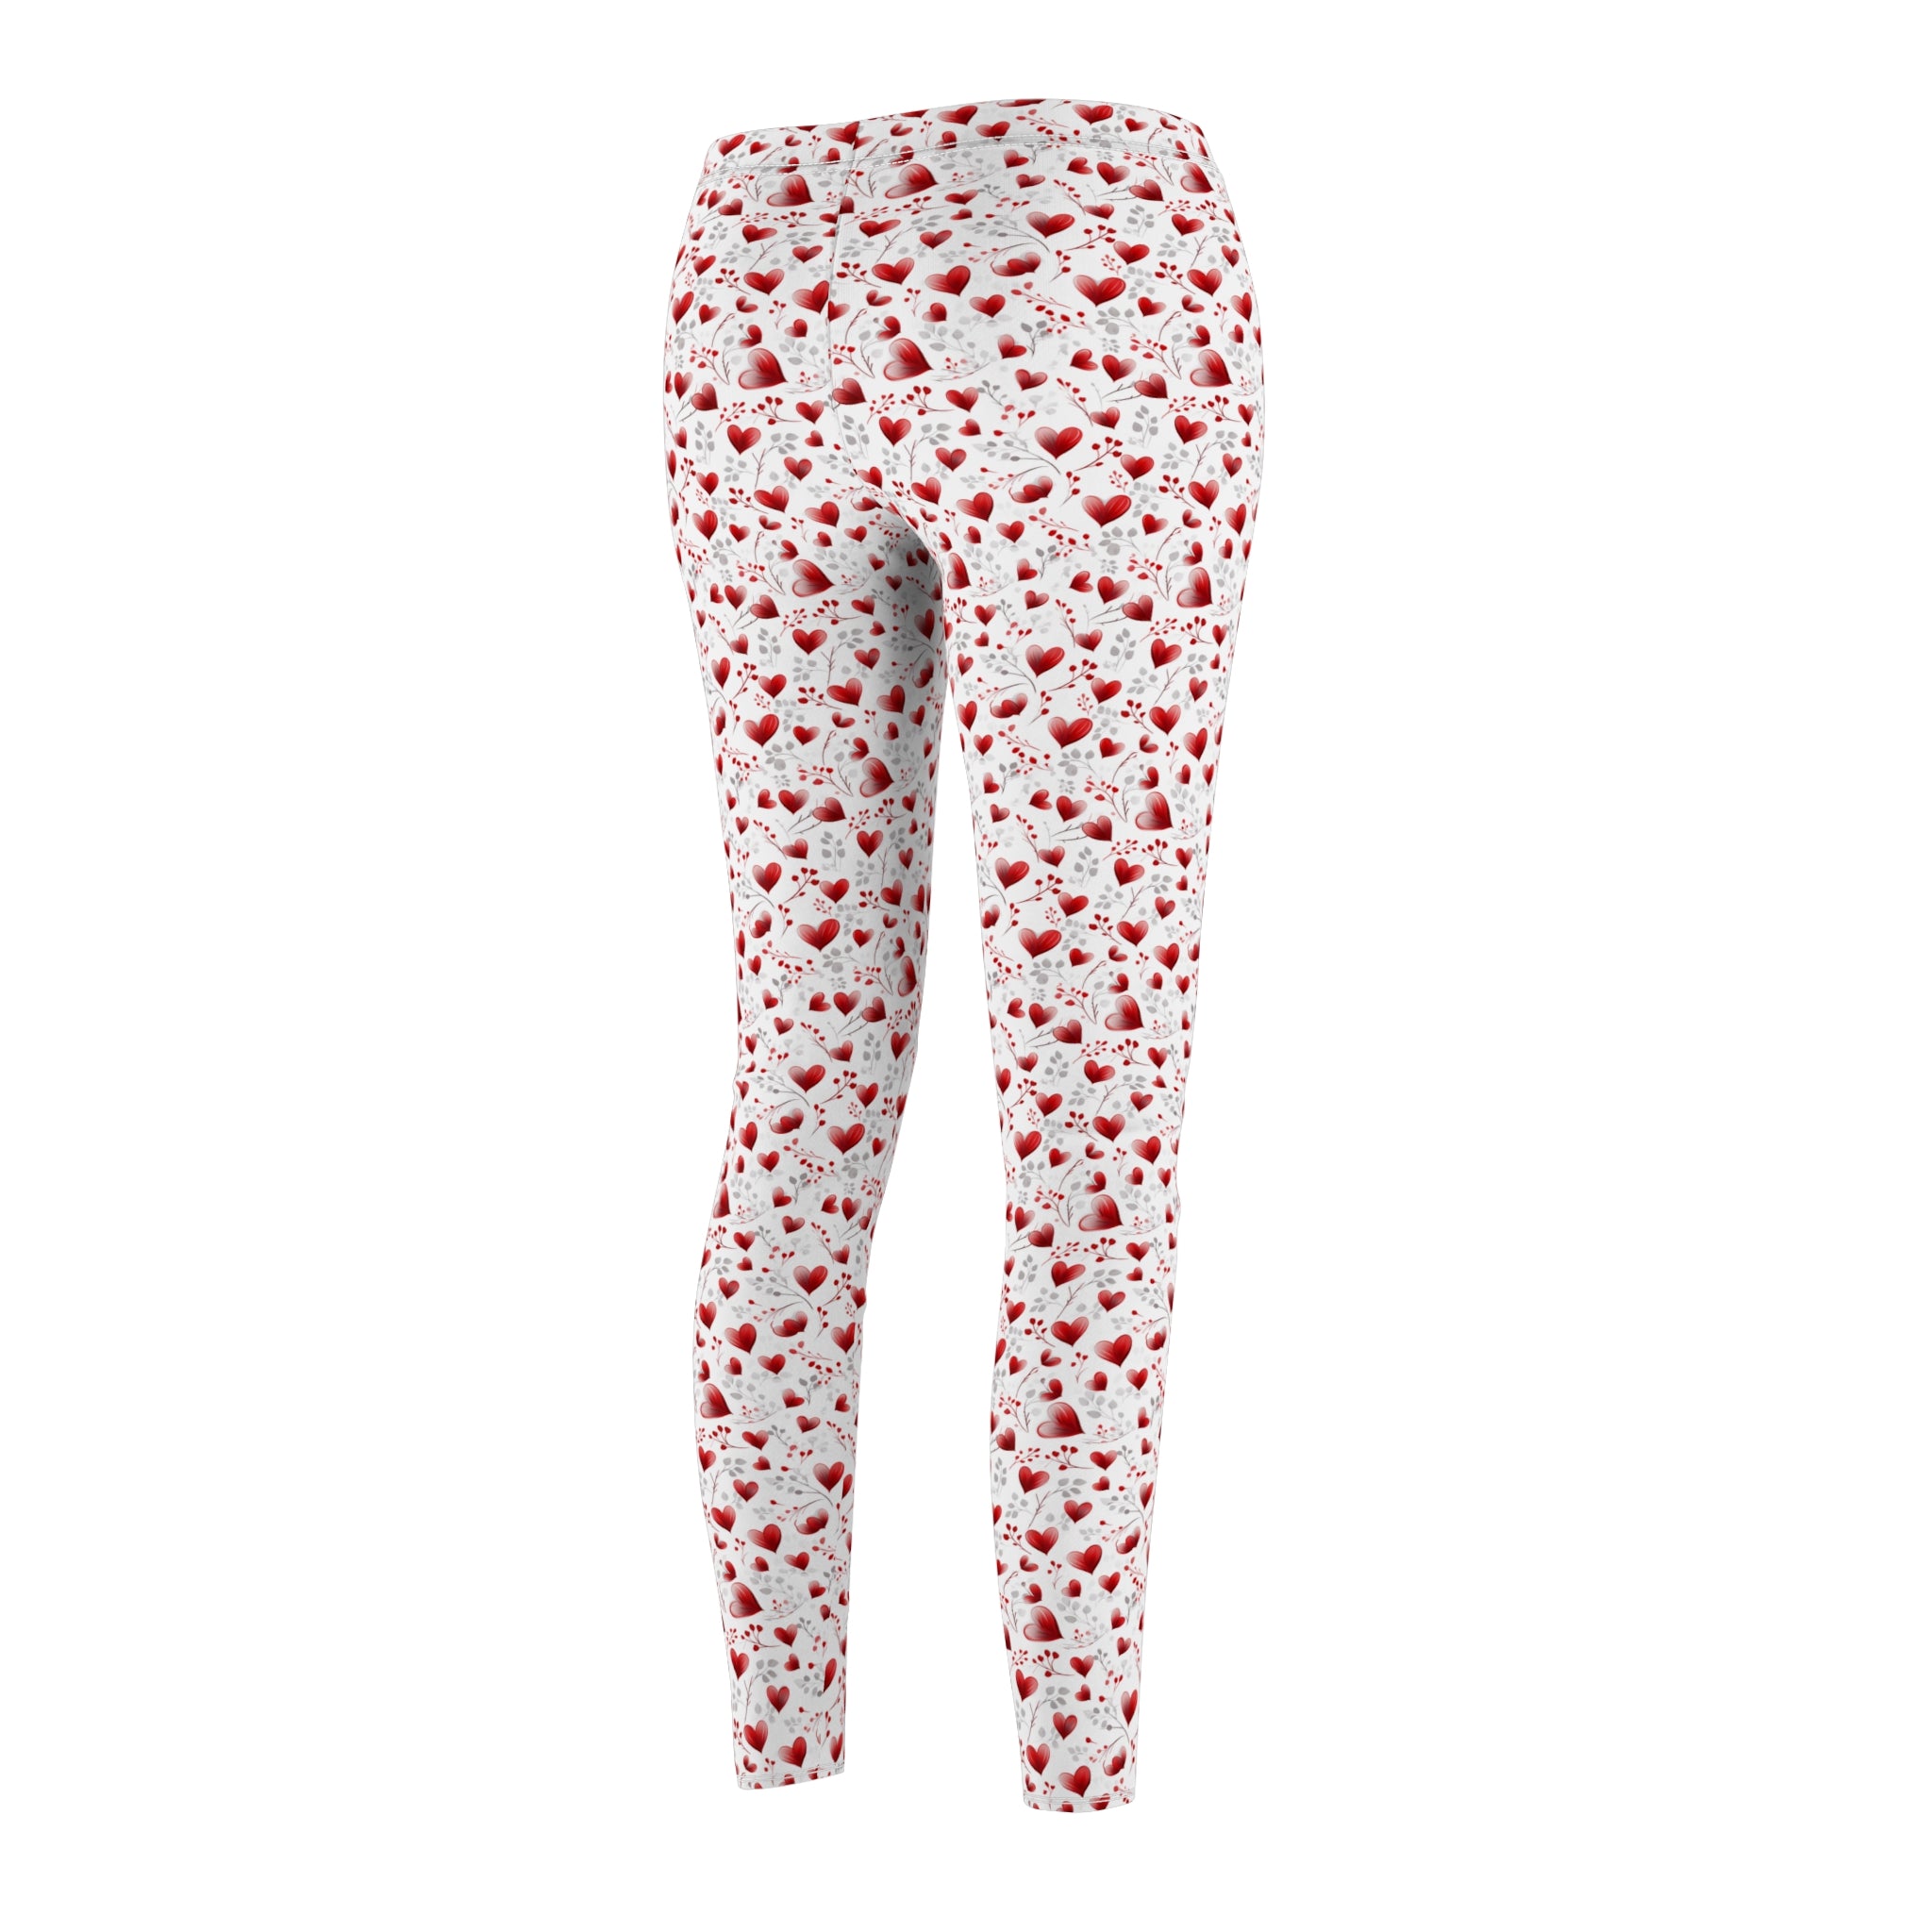 Valentine's Day Hearts Gym Leggings for Women - Love Your Workout